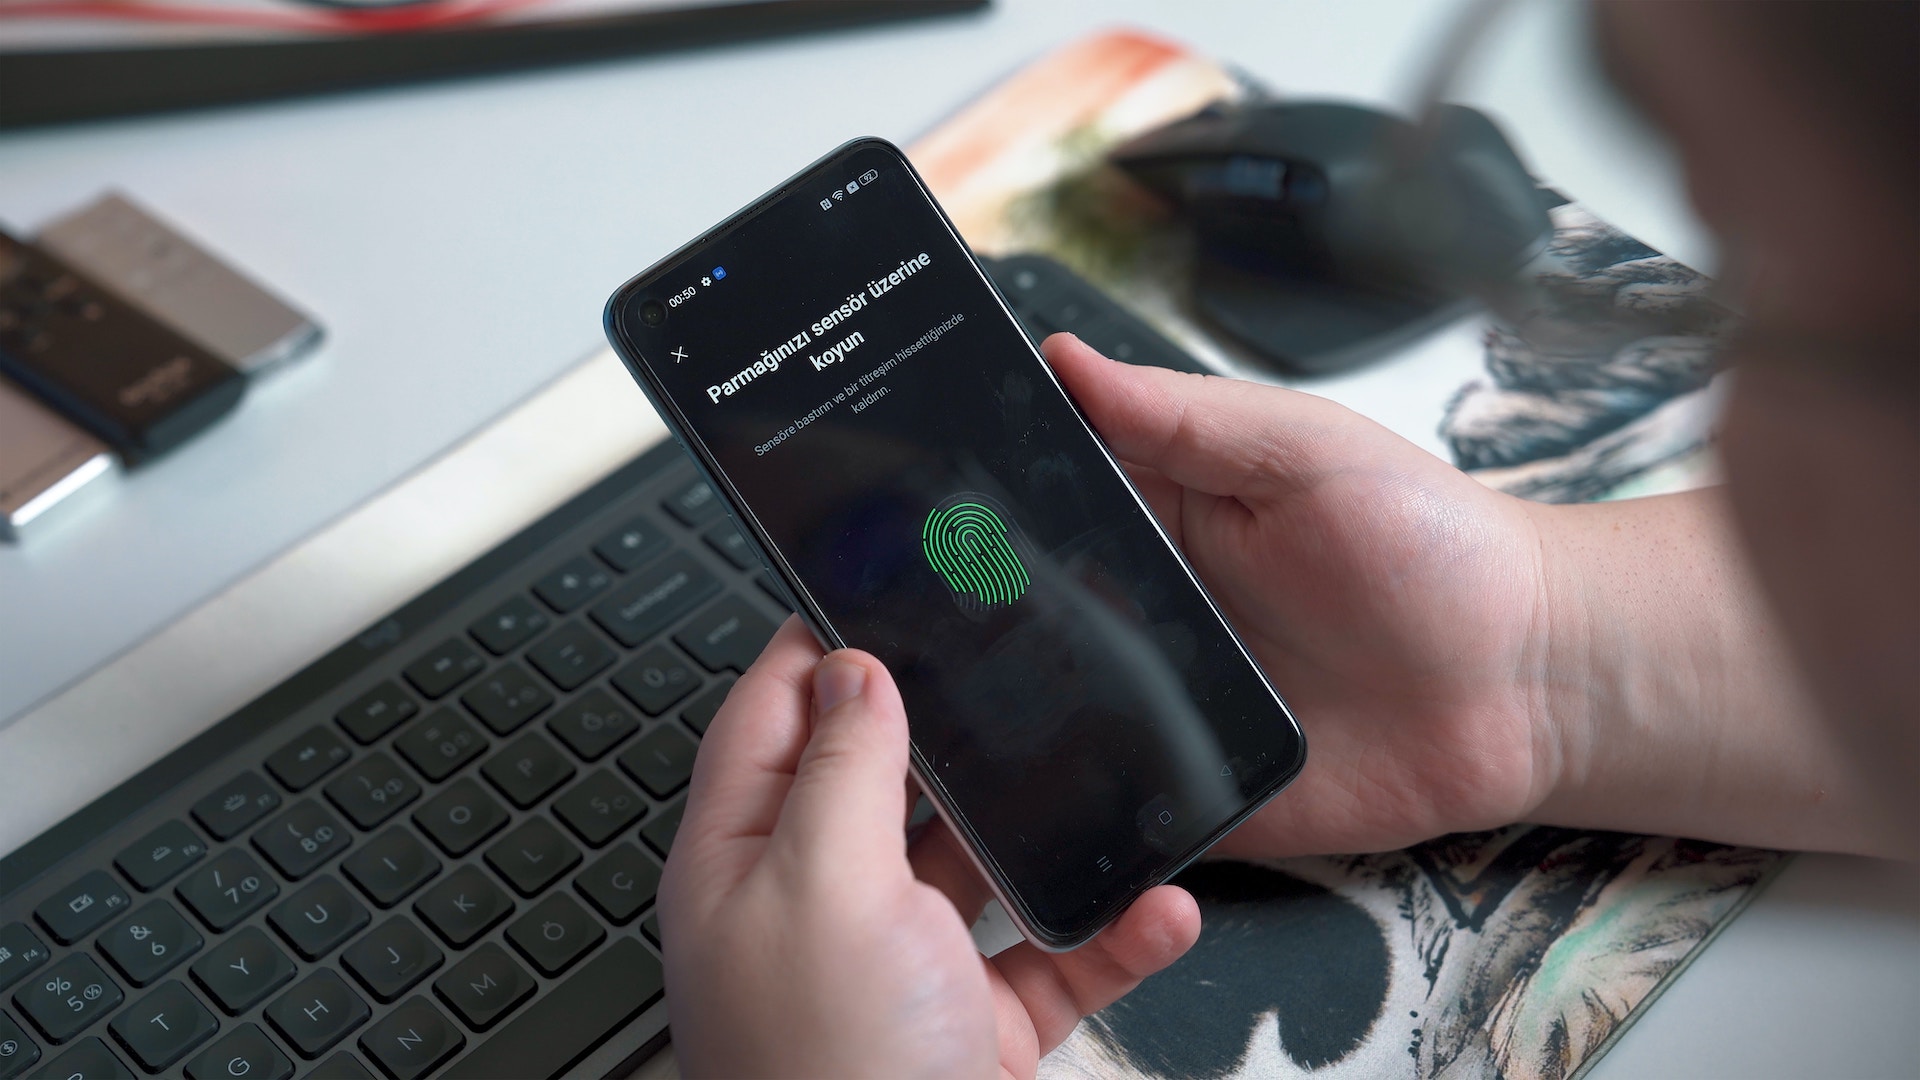 biometric fingerprint scanner on smartphone for payment authentication.